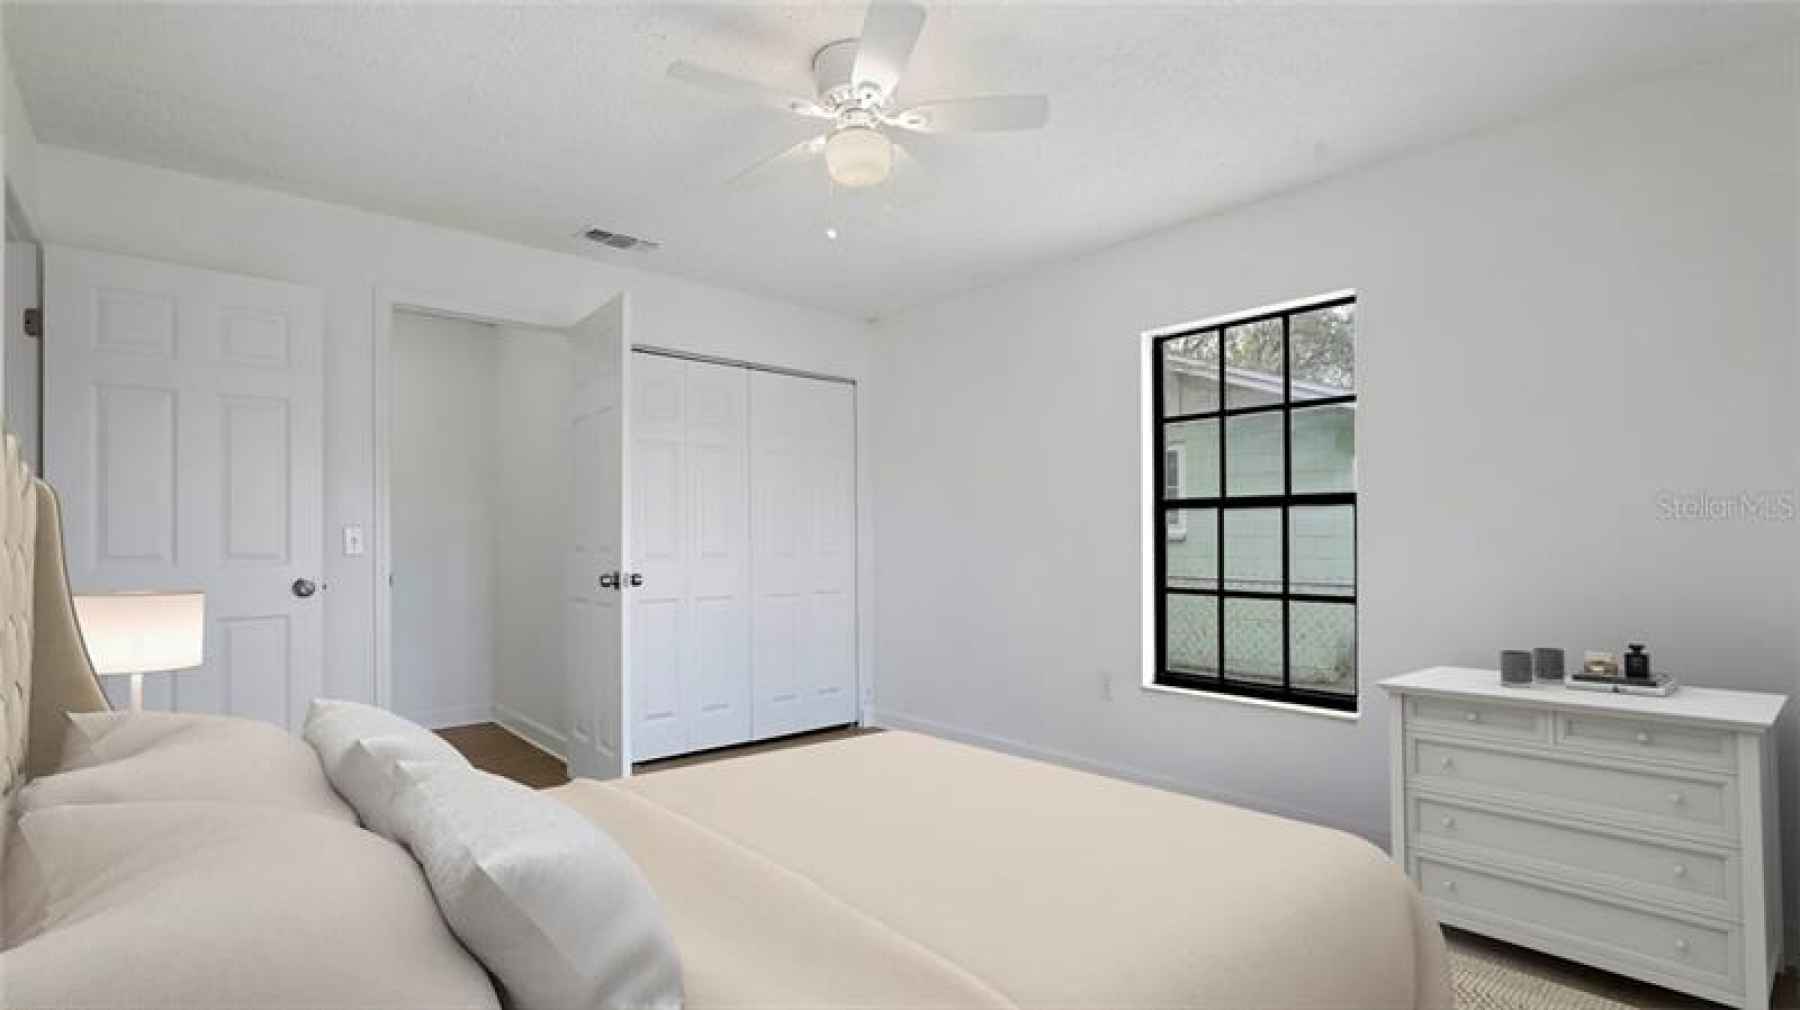 Staged master bedroom.  Open door is a large walk-in closet. (could be made into a 2nd bathroom if d